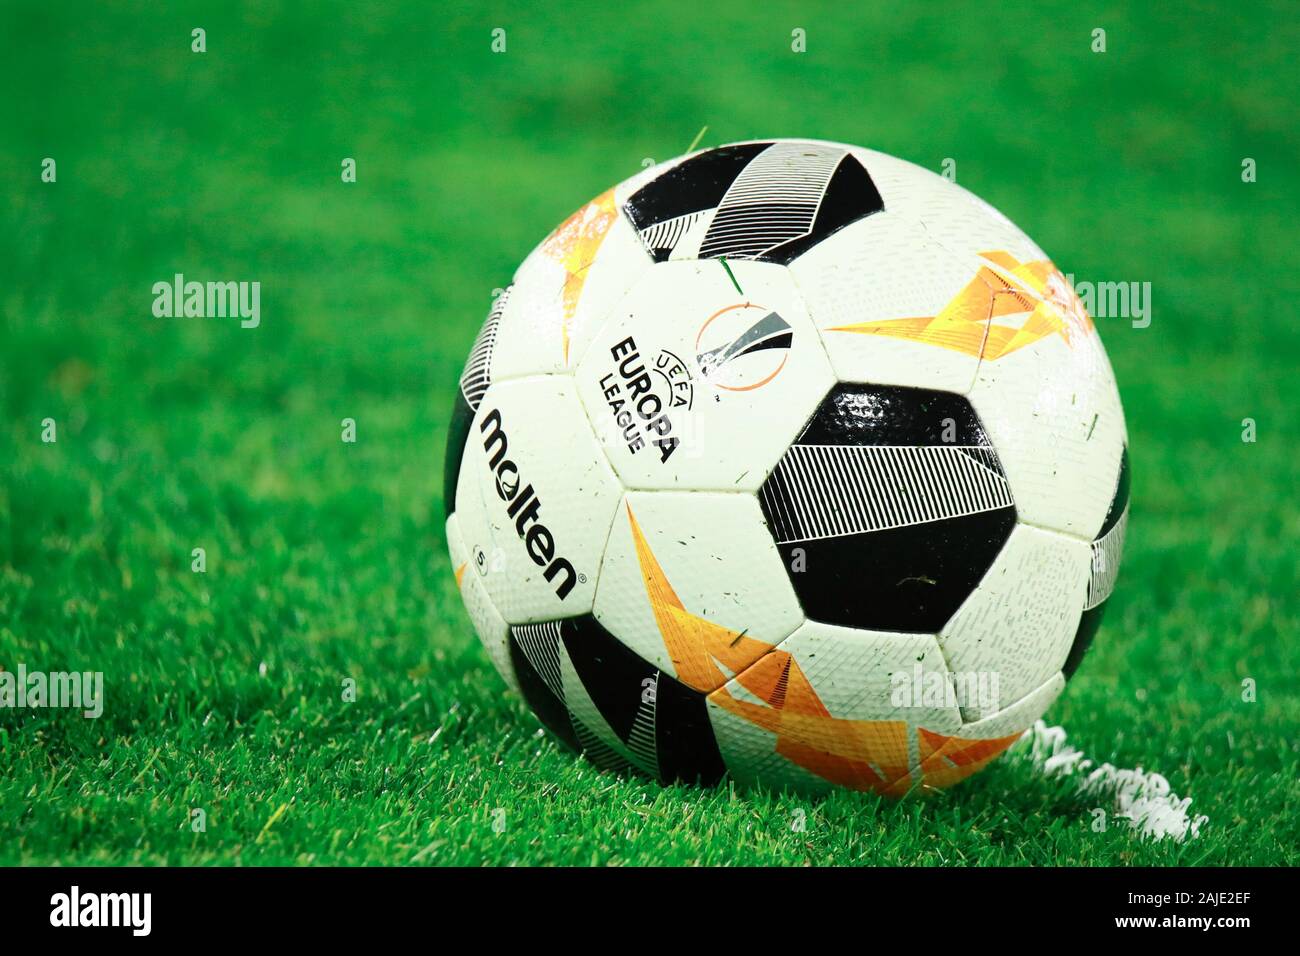 Wolfsburg, Germany, December 12, 2019: official game ball of UEFA Europa League on ground before a free kick during the match Stock Photo